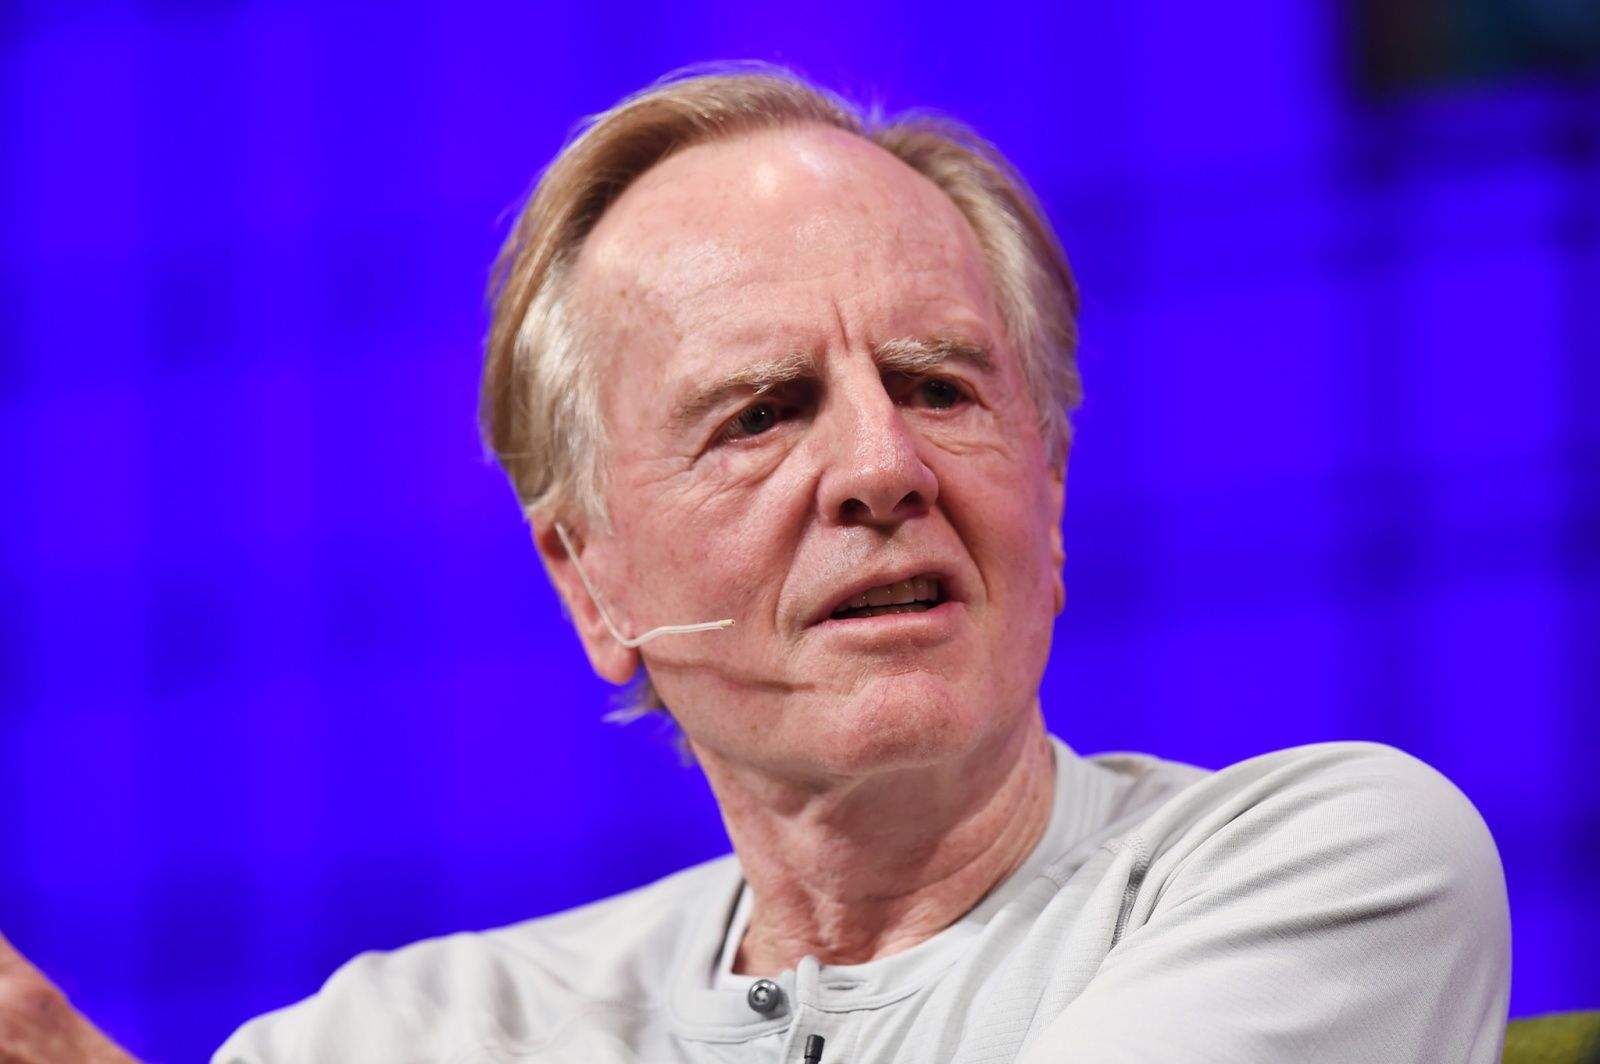 15-mind-blowing-facts-about-john-sculley